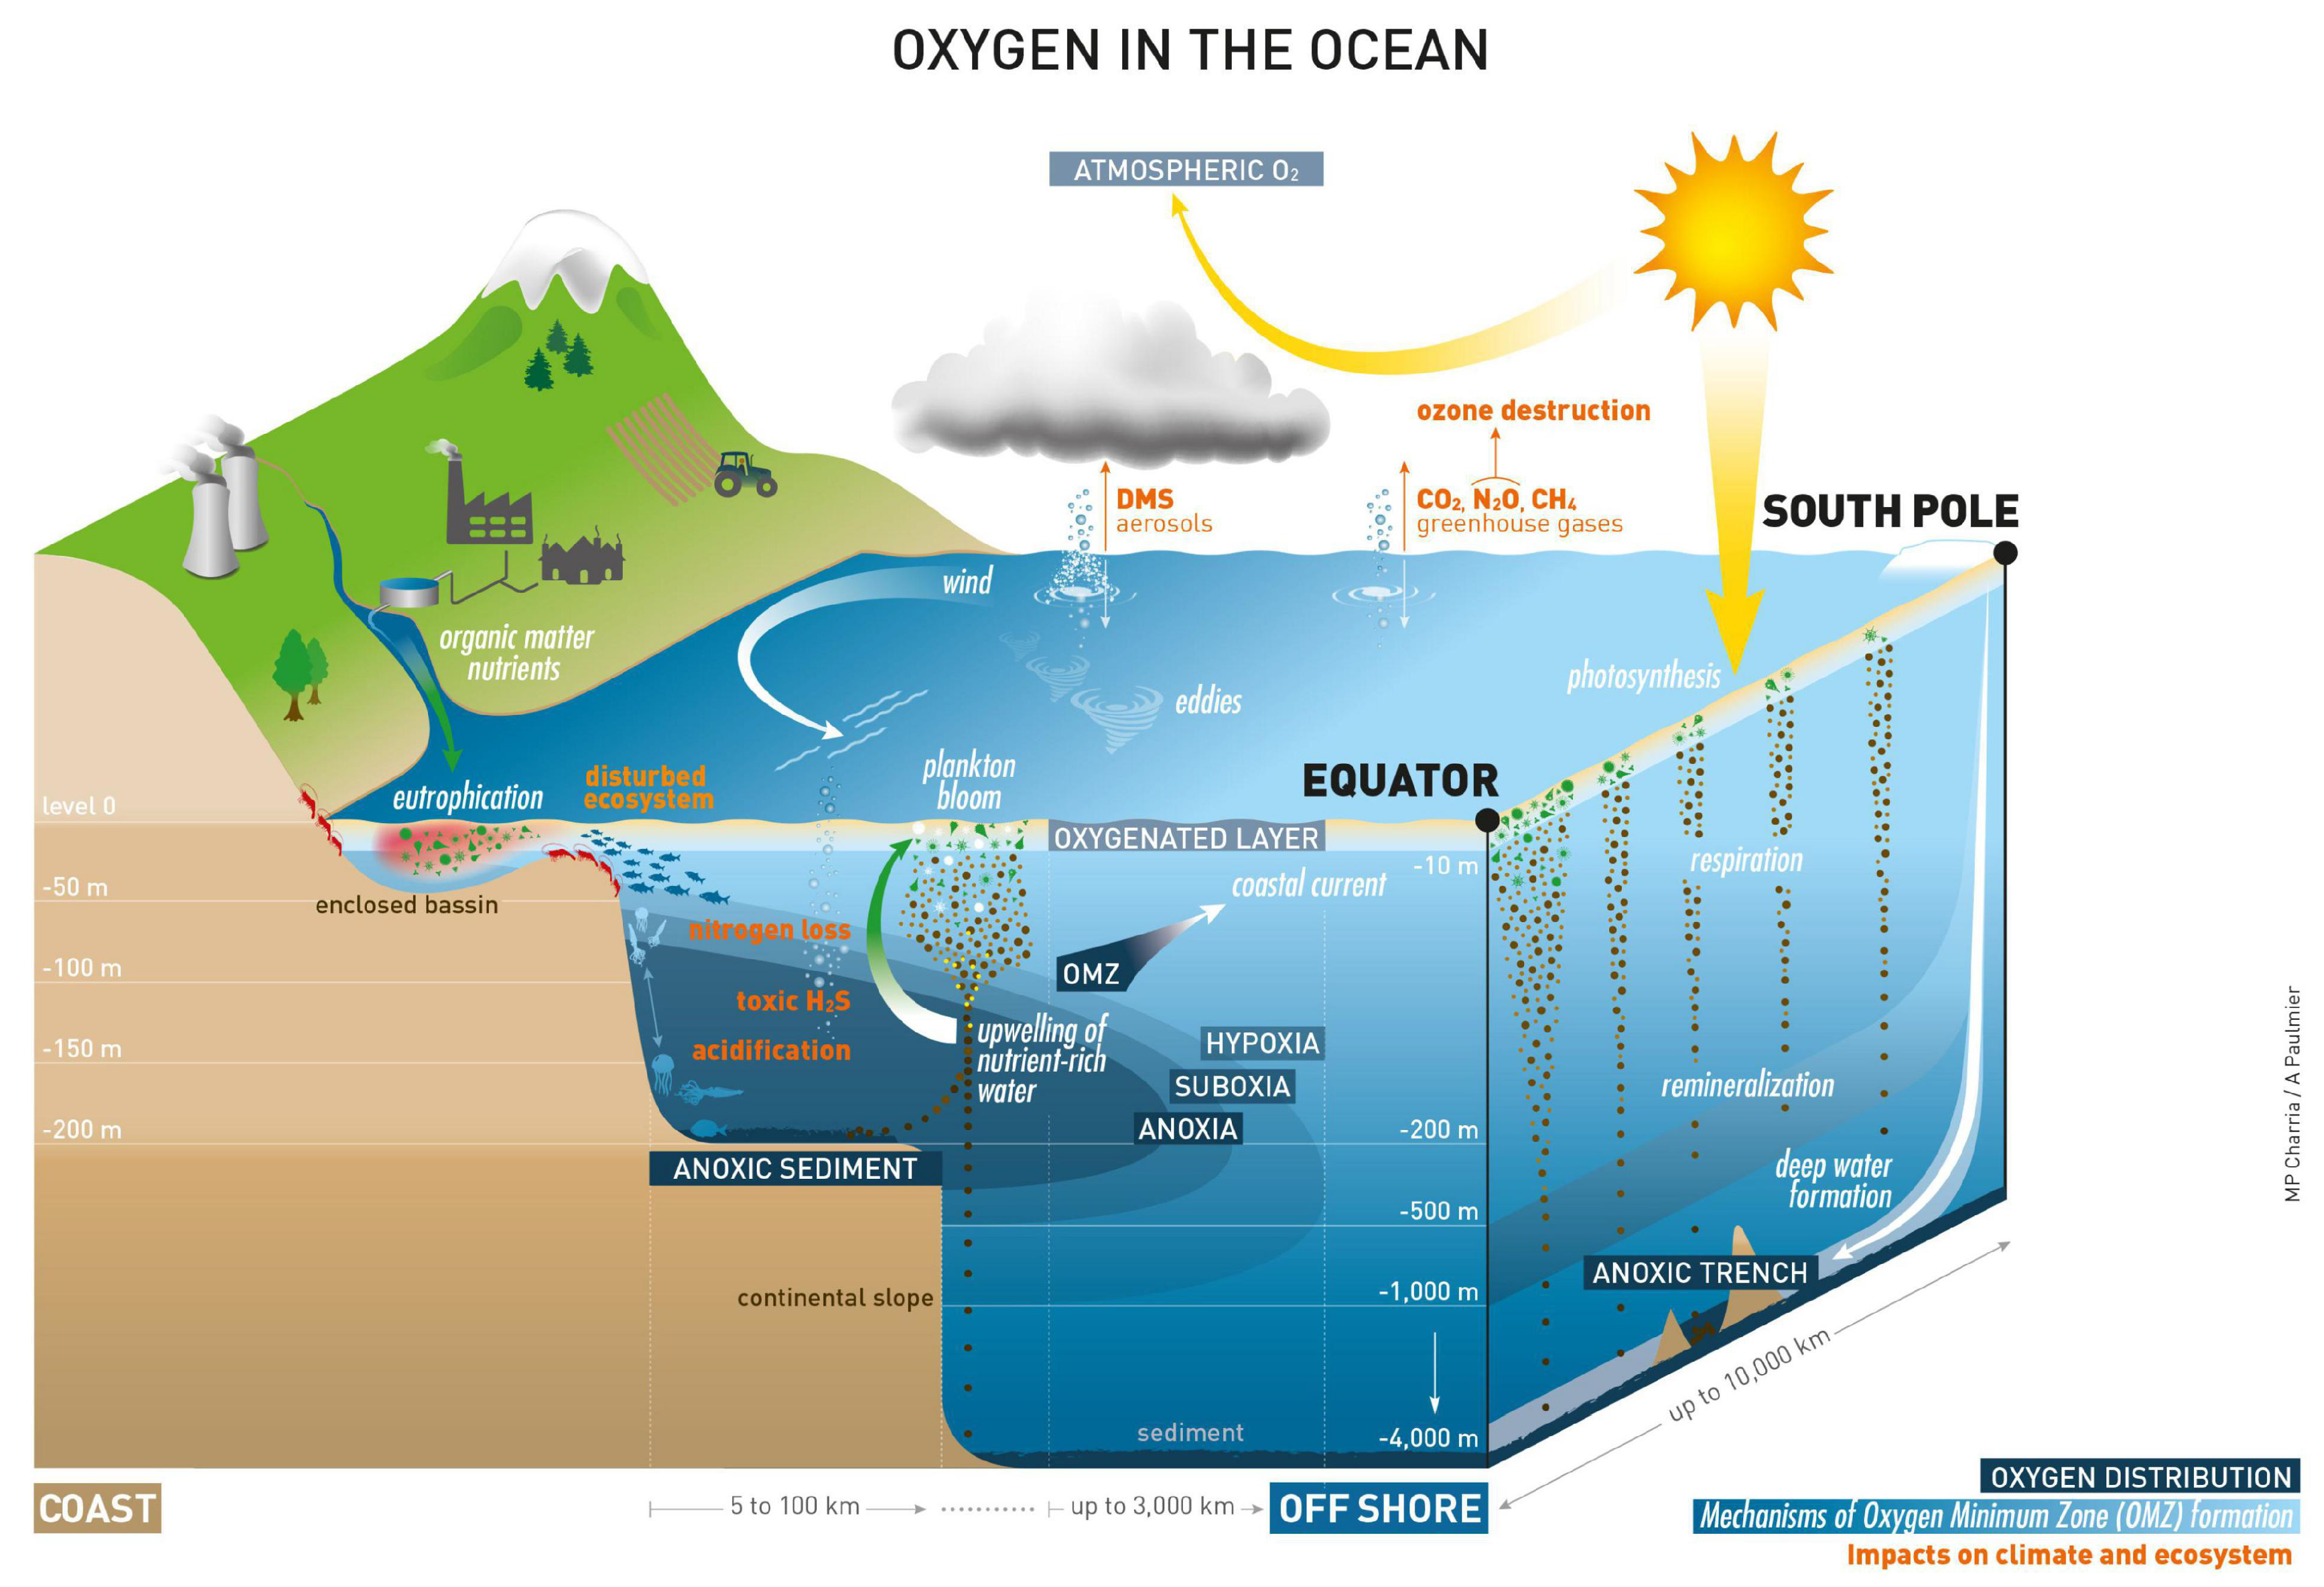 oxygen cycle in water